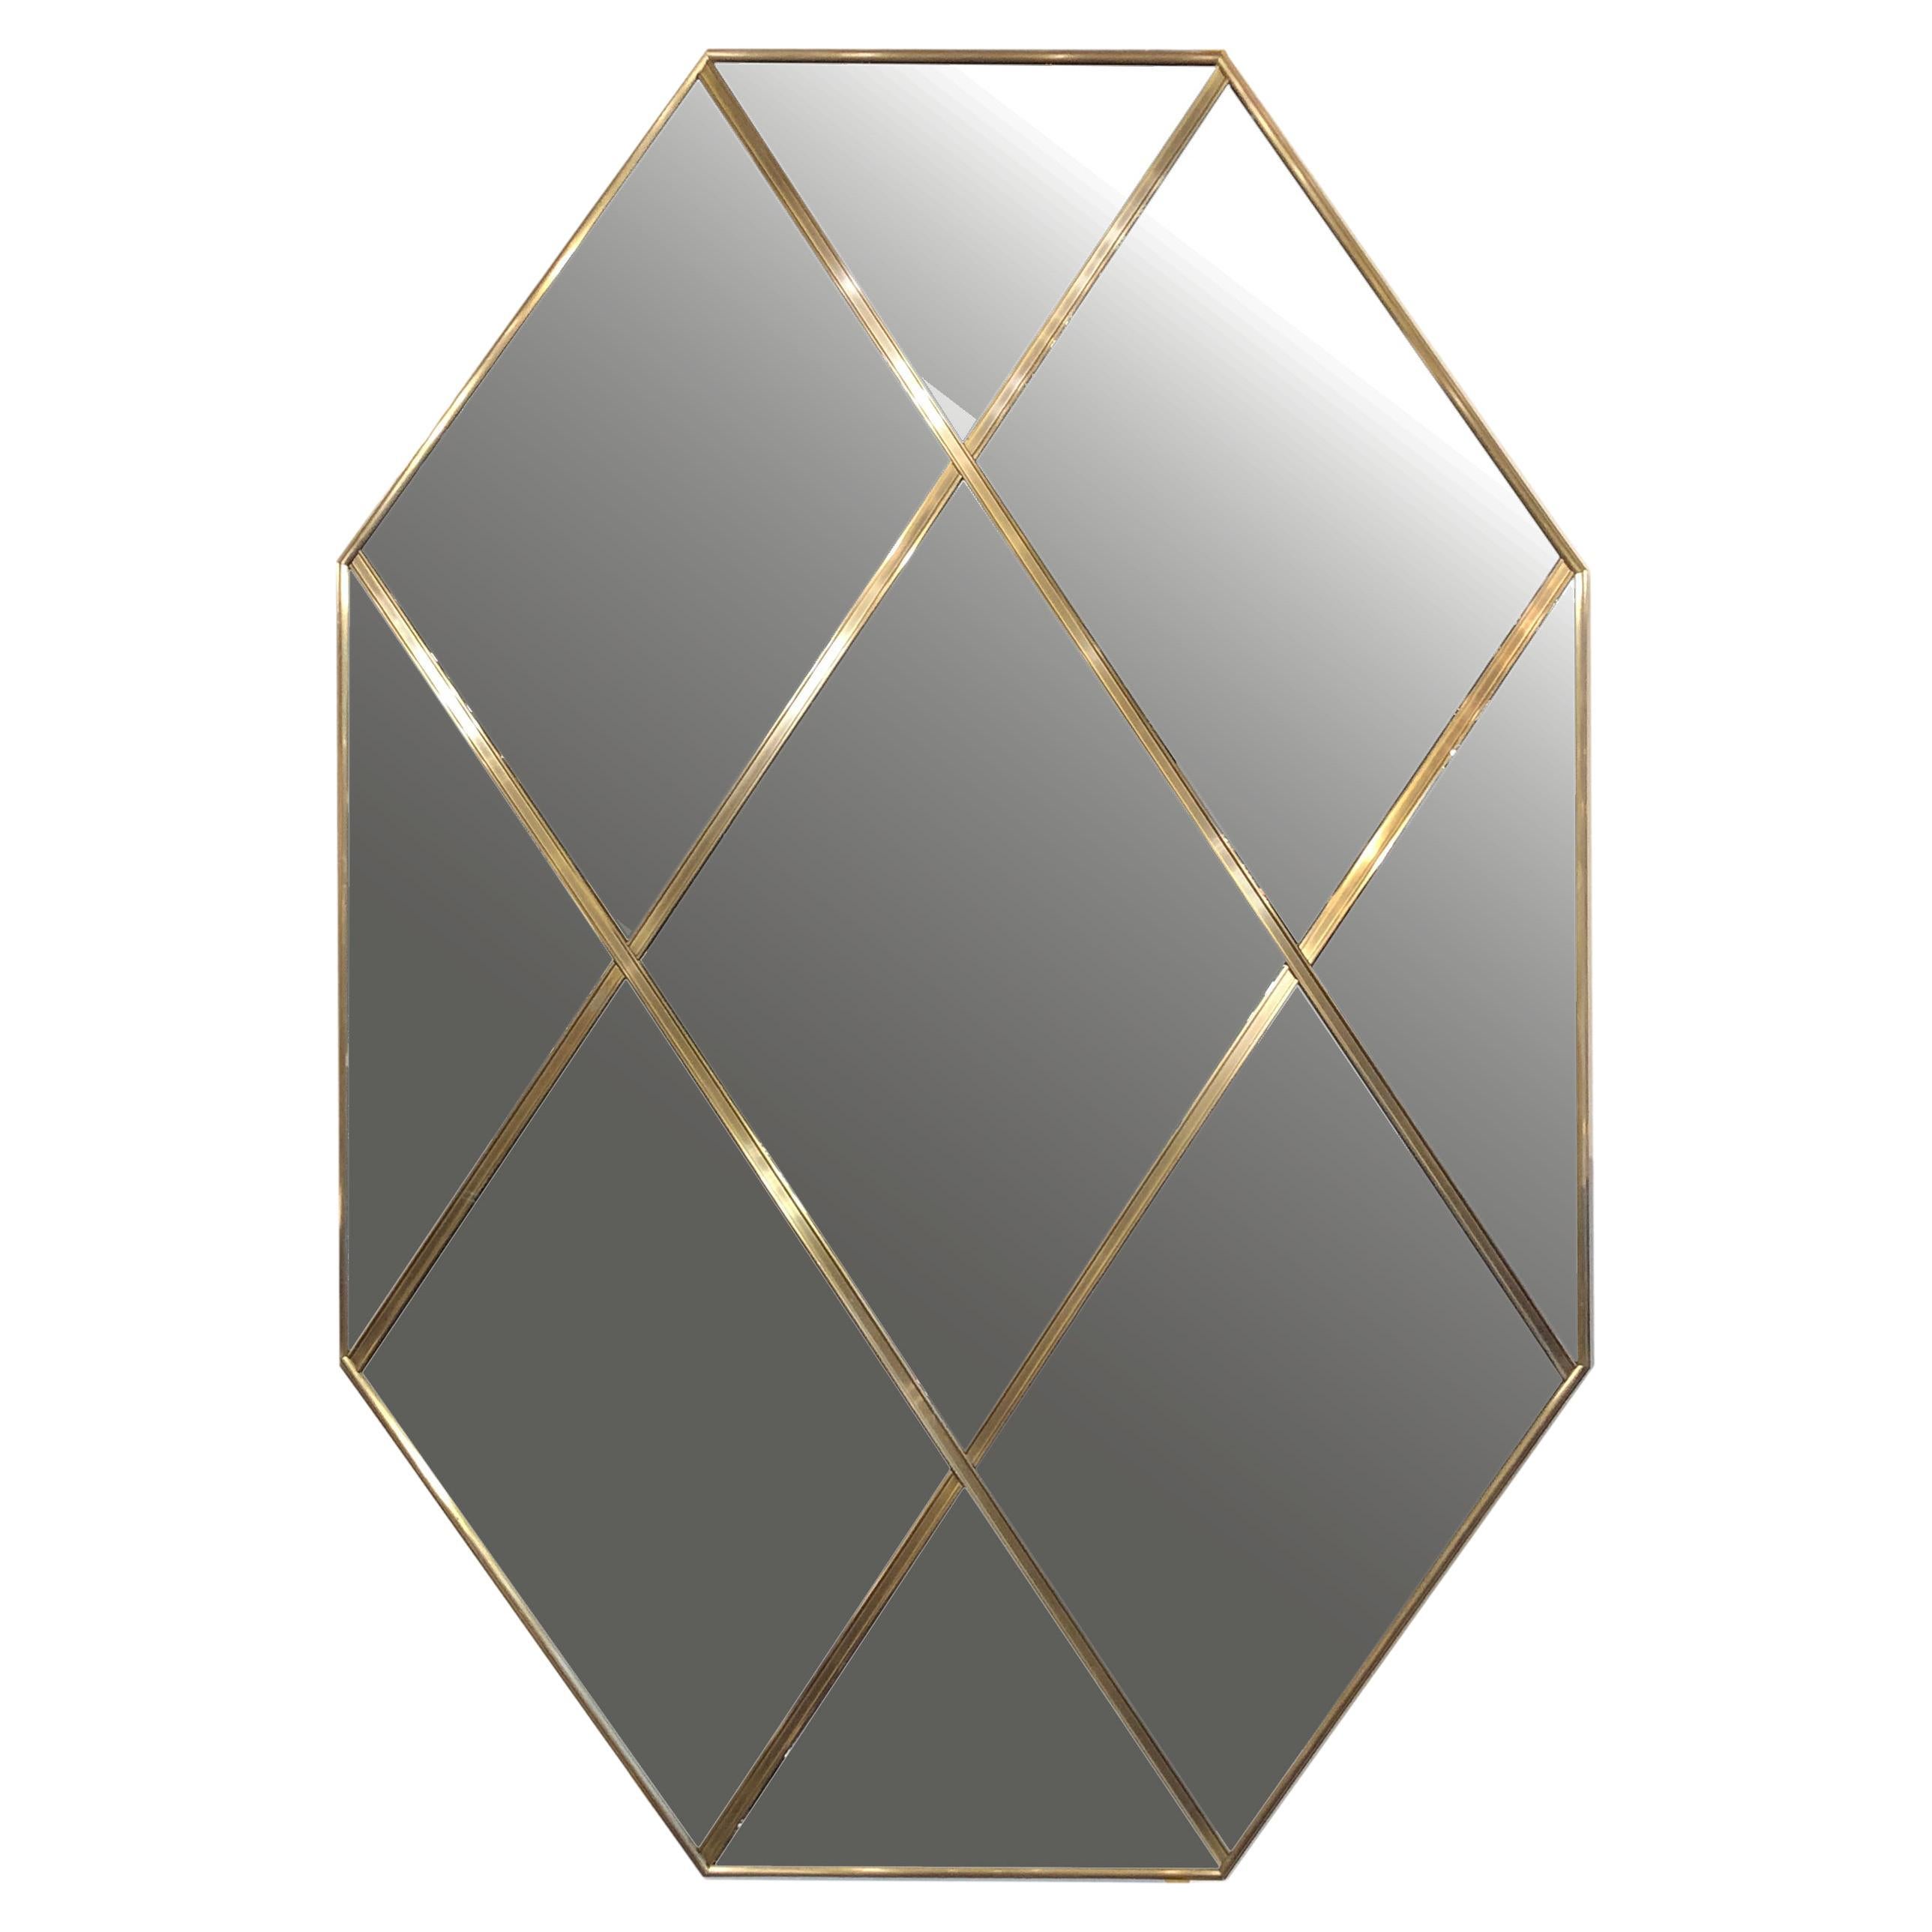 Contemporary Octagonal Art Deco Style Brass Paneled Smoked Mirror 90 X 120 CM For Sale